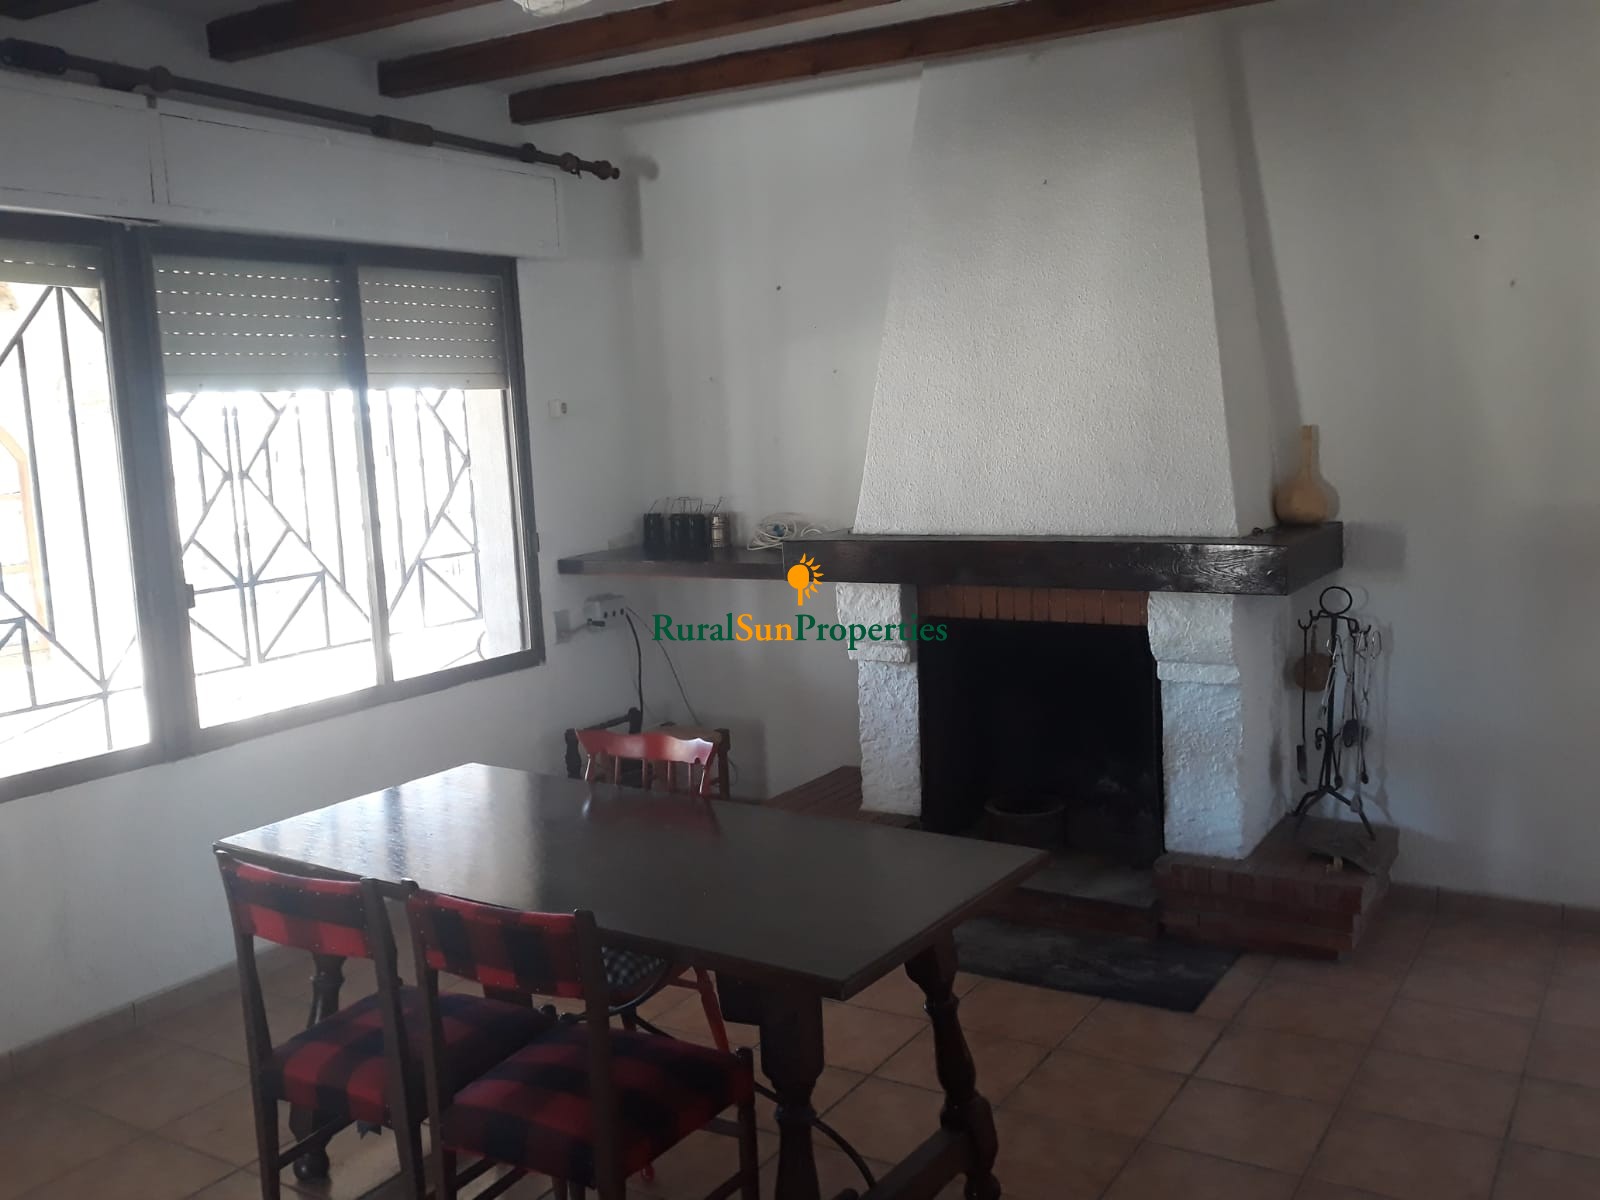 Very spacious country house in Bullas 35 minutes from Murcia city